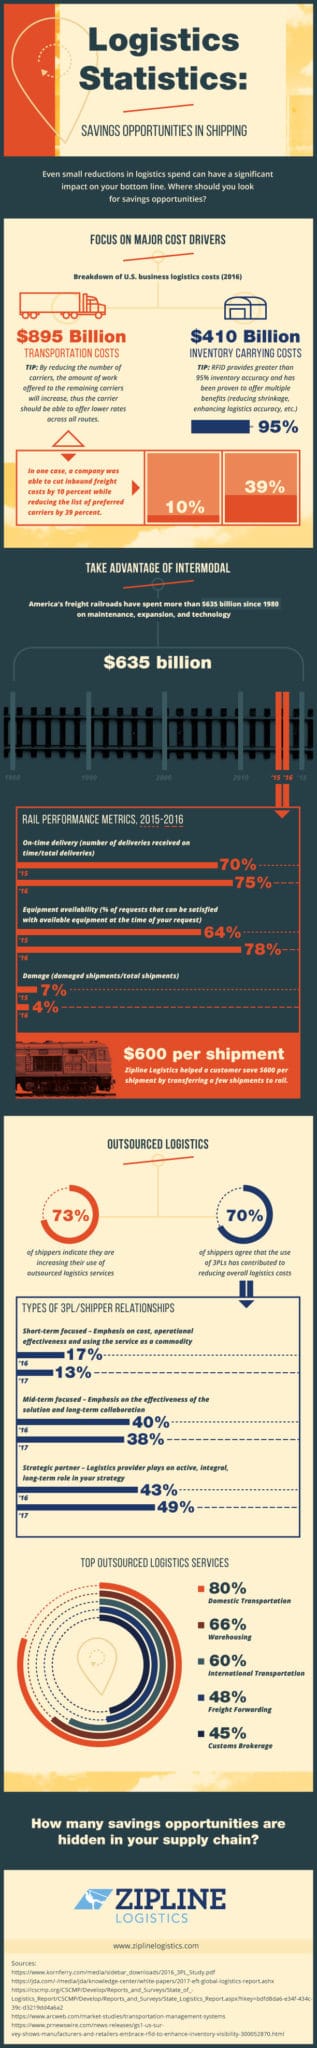 Logistics Statistics: Savings Opportunities in Shipping (INFOGRAPHIC)